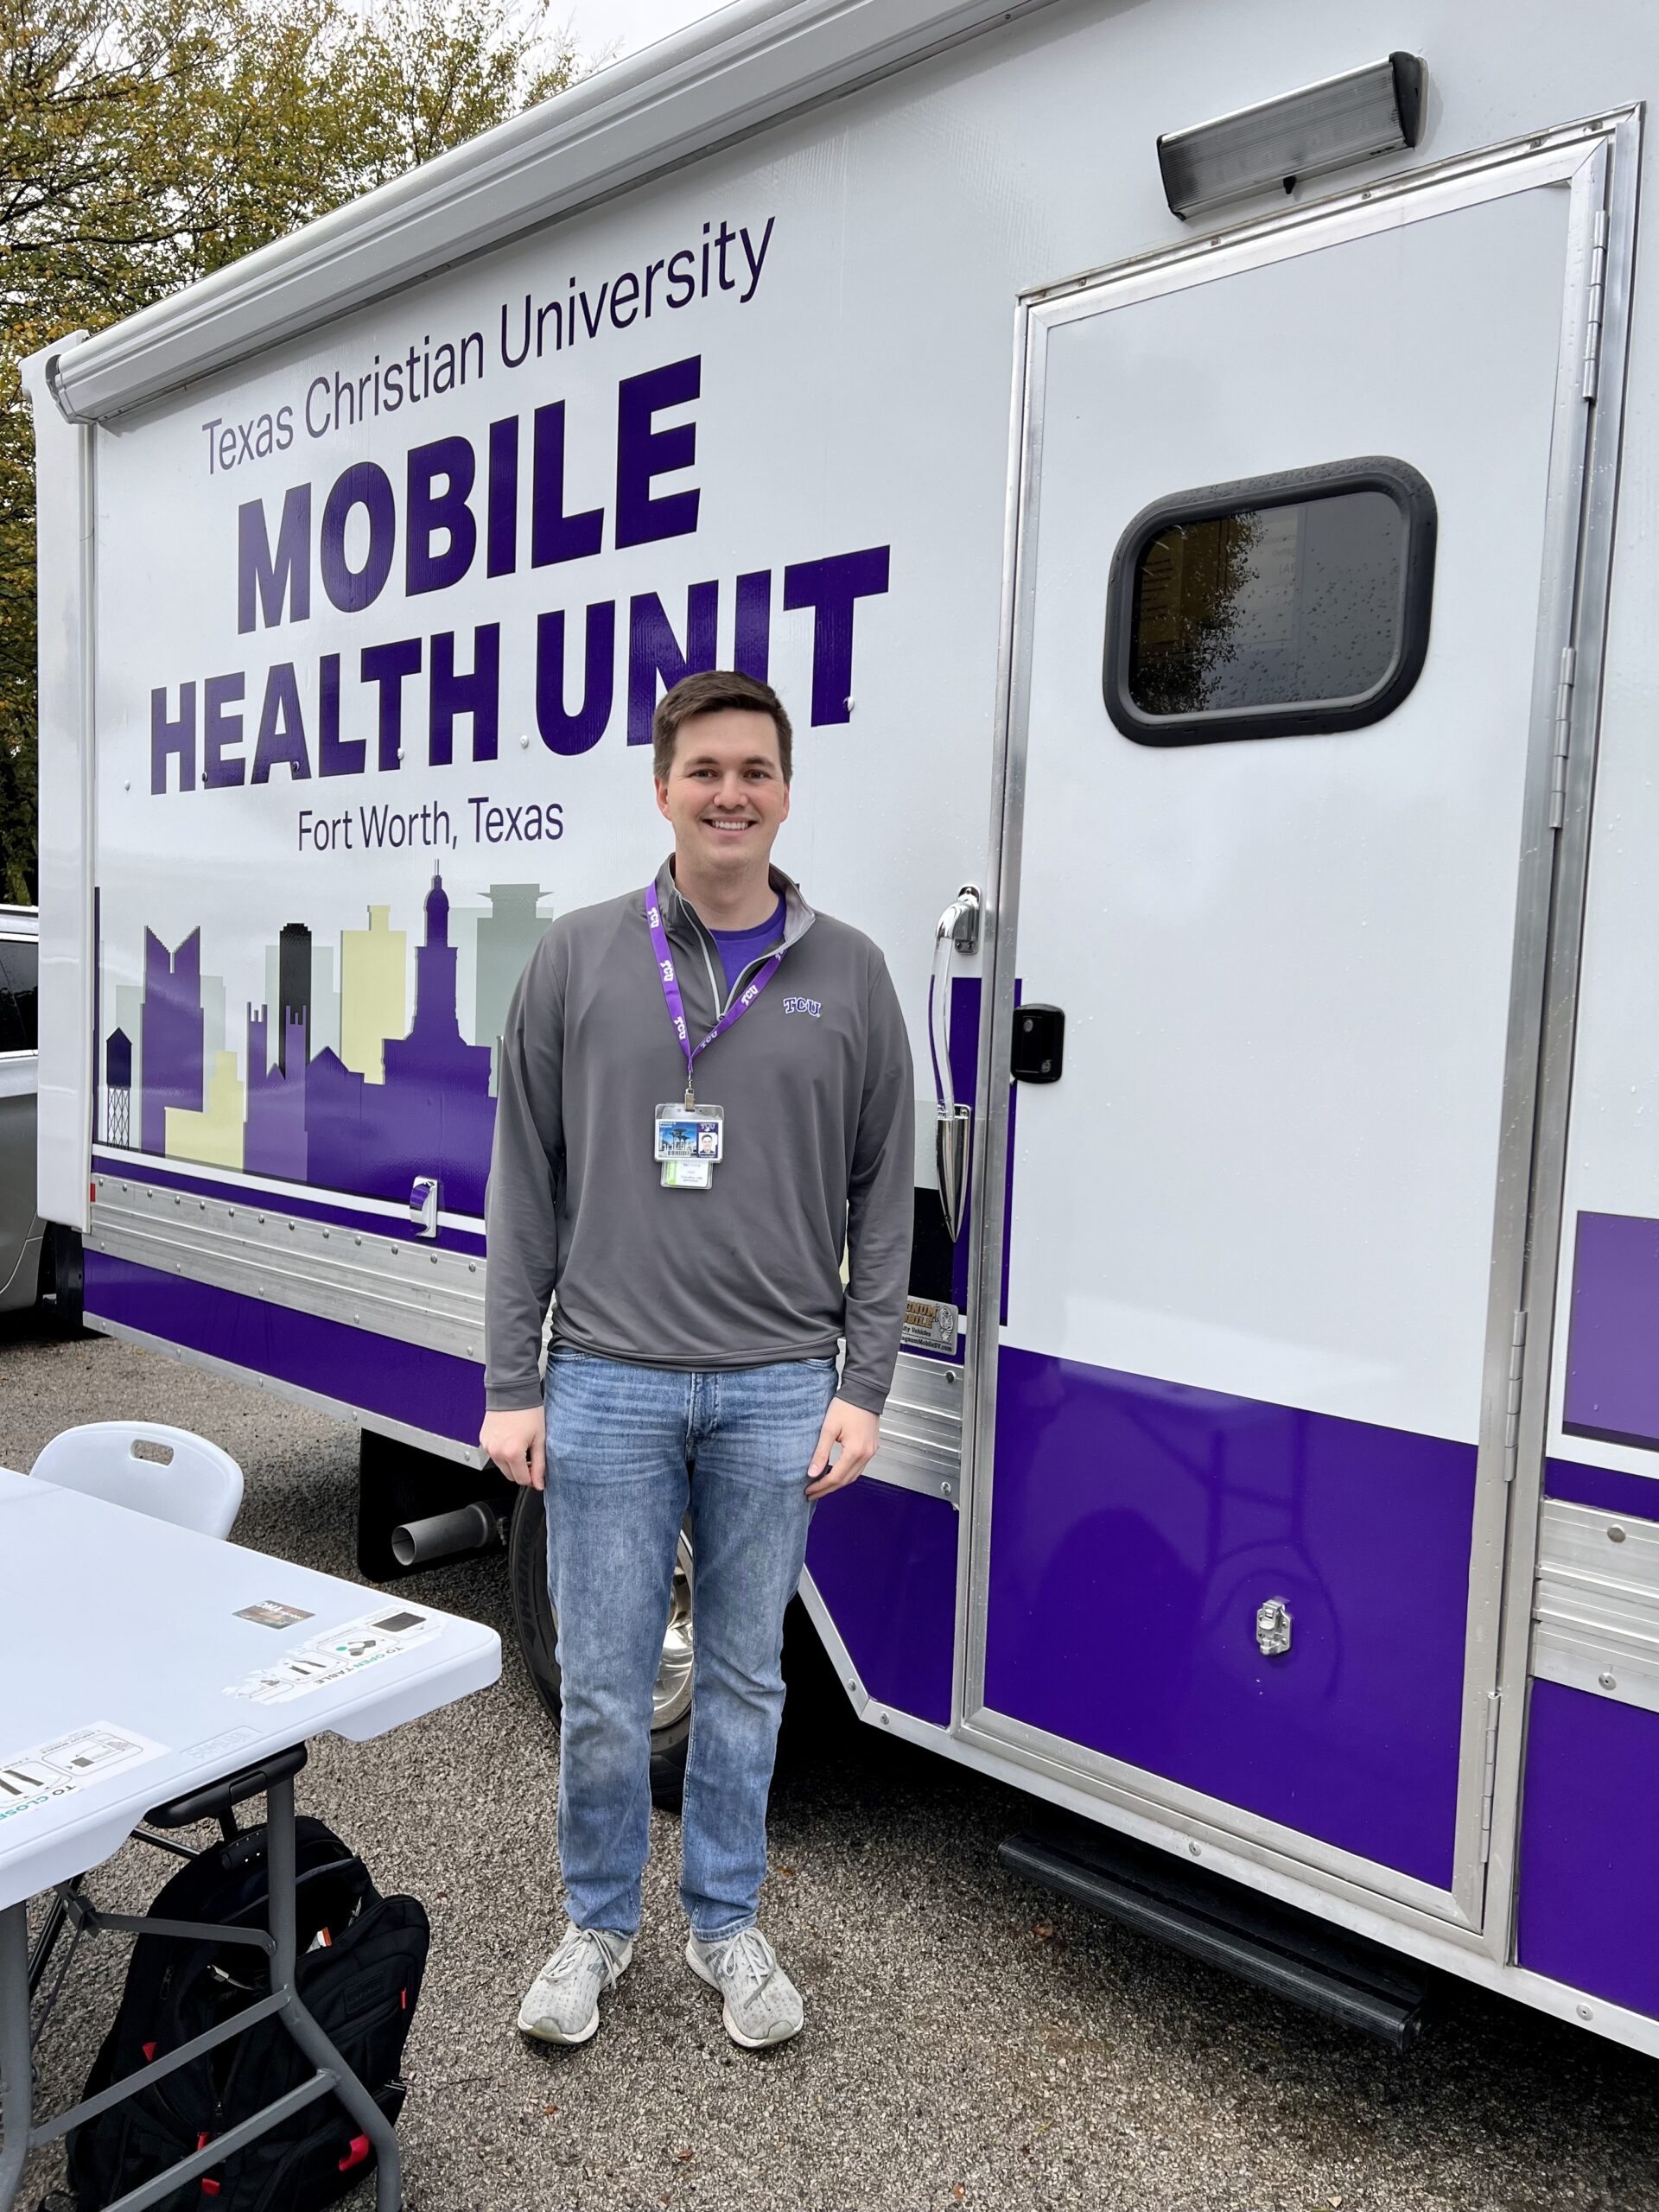 TCU's mobile health unit used in a health fair during annual service day